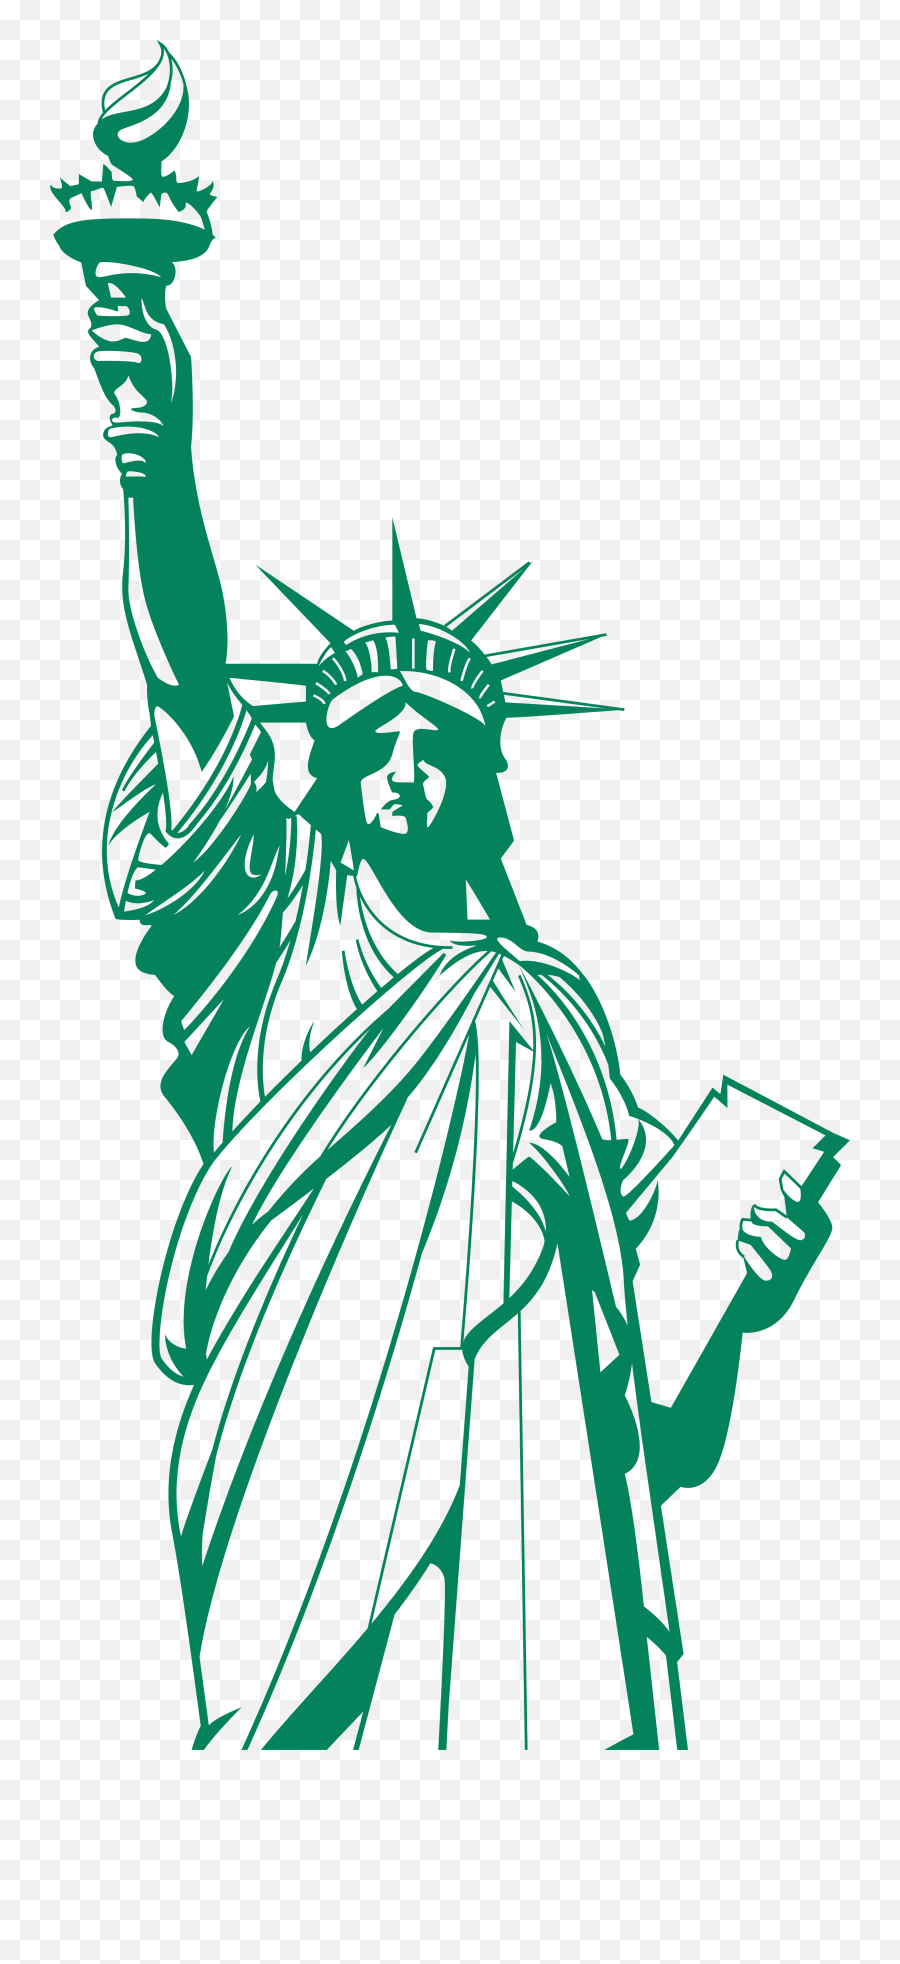 Download Hd Statue Of Liberty Logo Png Graphic Black And - Drawing Statue Of Liberty,Statue Of Liberty Png